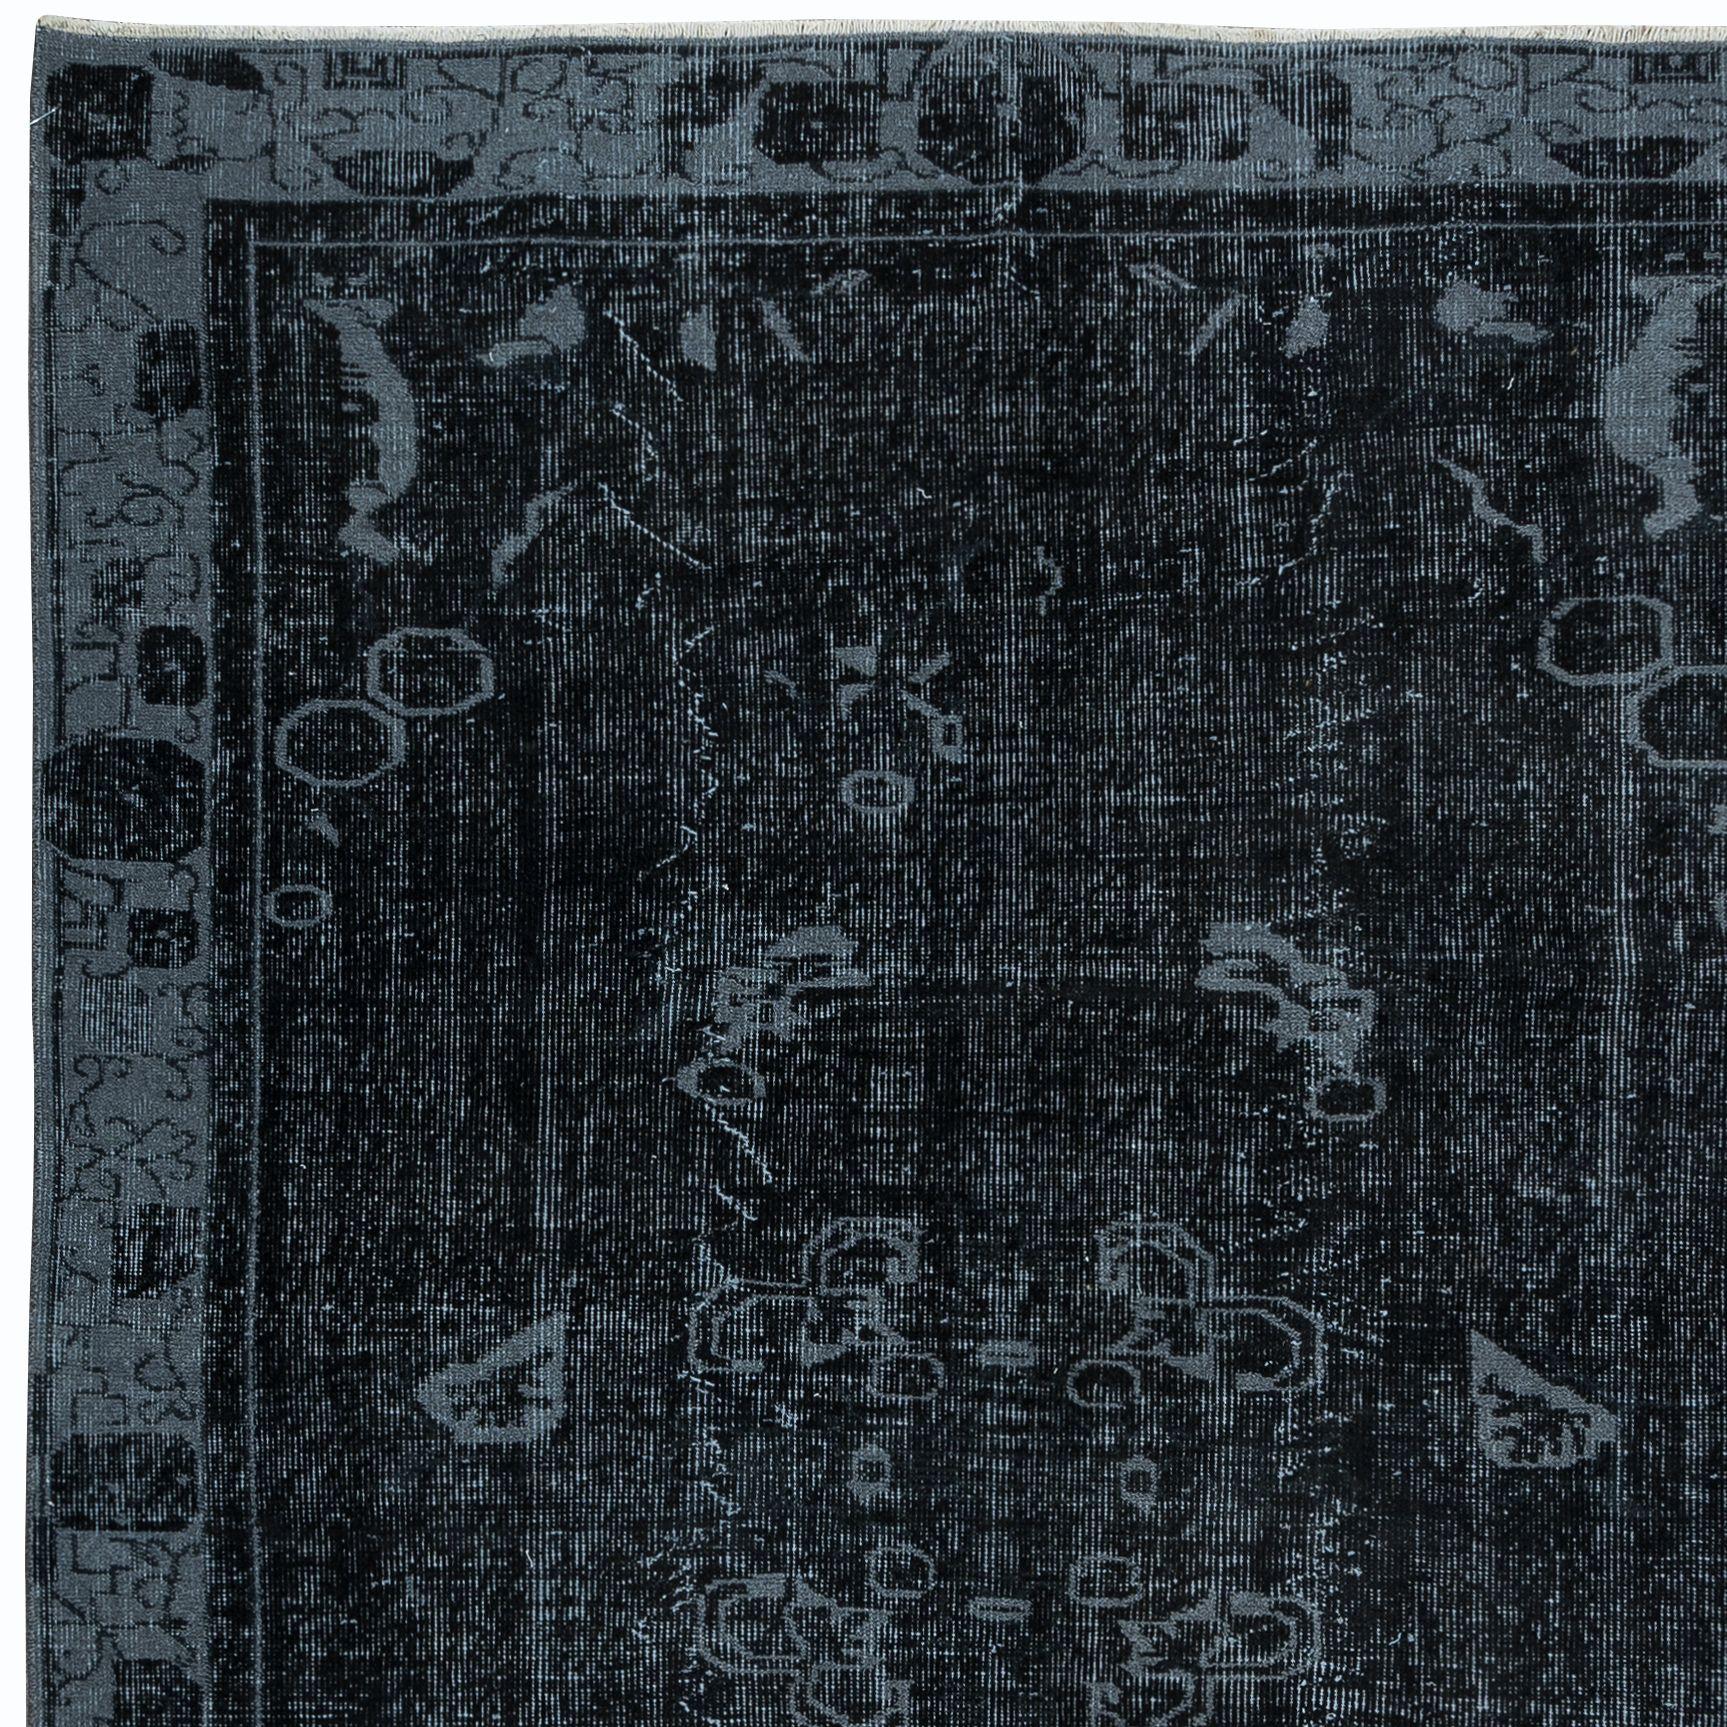 Hand-Woven 5.4x7.7 Ft Modern Black & Gray Art Deco Area Rug Hand-Knotted in Turkey For Sale